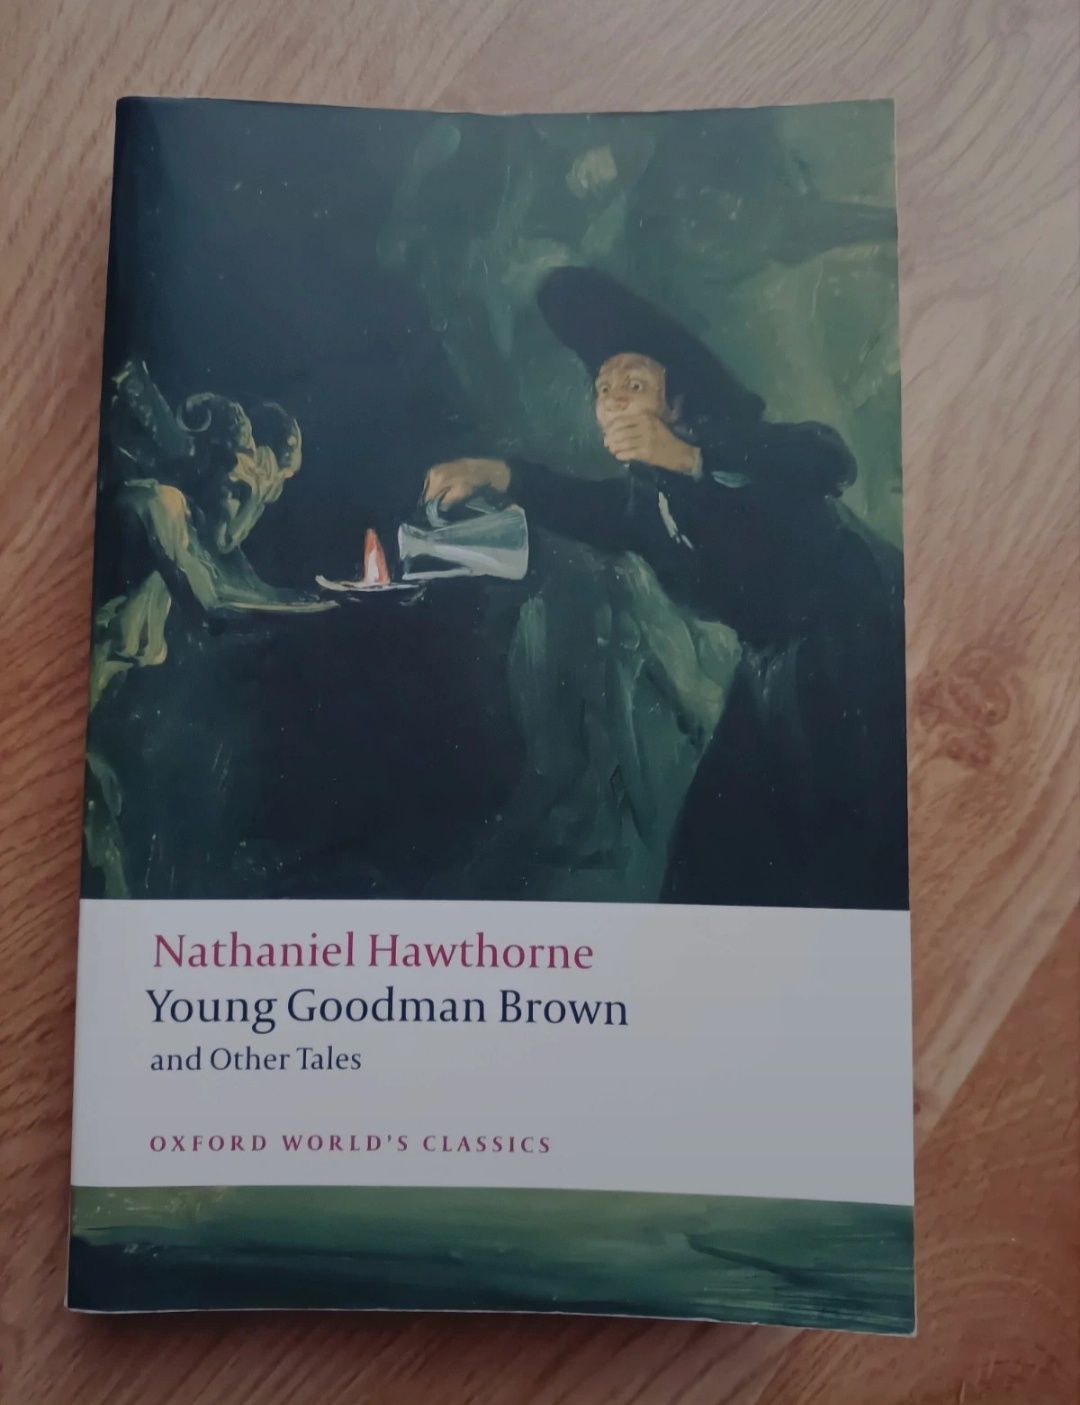 Nathaniel Hawthorne Young Goodman Brown and other tales